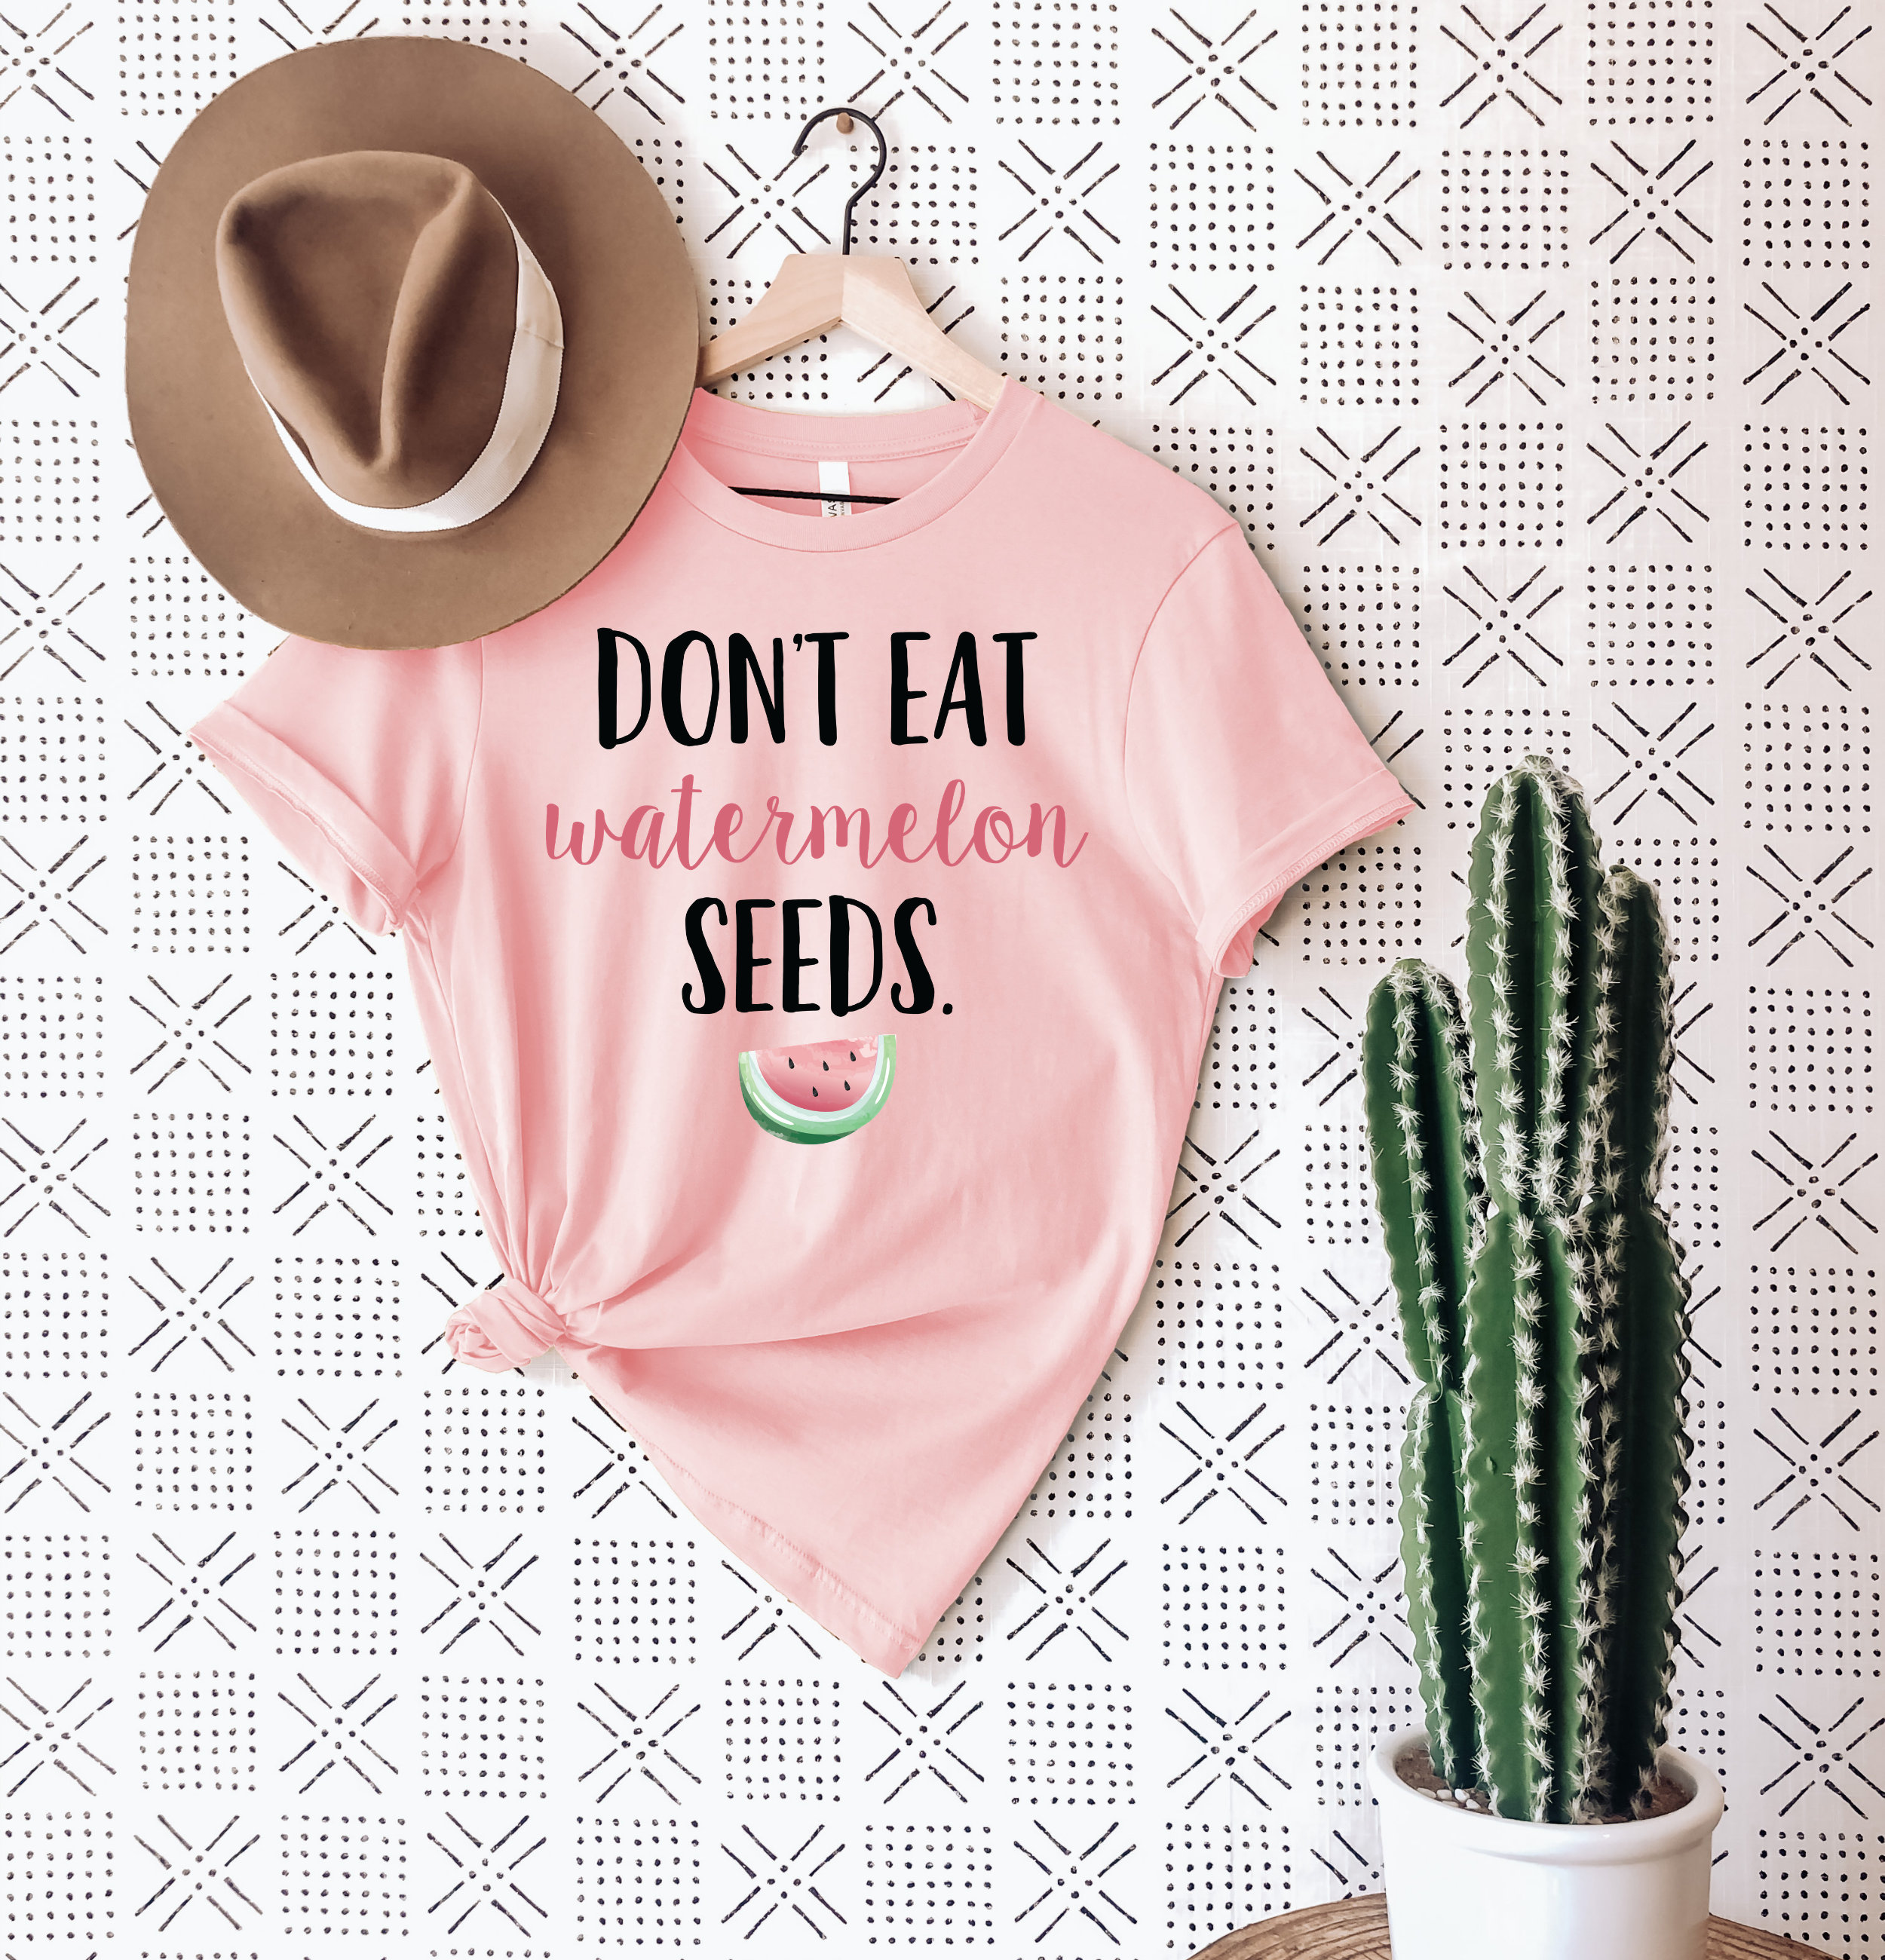 Don't Eat Watermelon Seeds  Shirt Pregnancy Announcement First Time Pregnancy Funny Meme Pregnancy Reveal Shirt Plus Size Clothing Mom Shirt